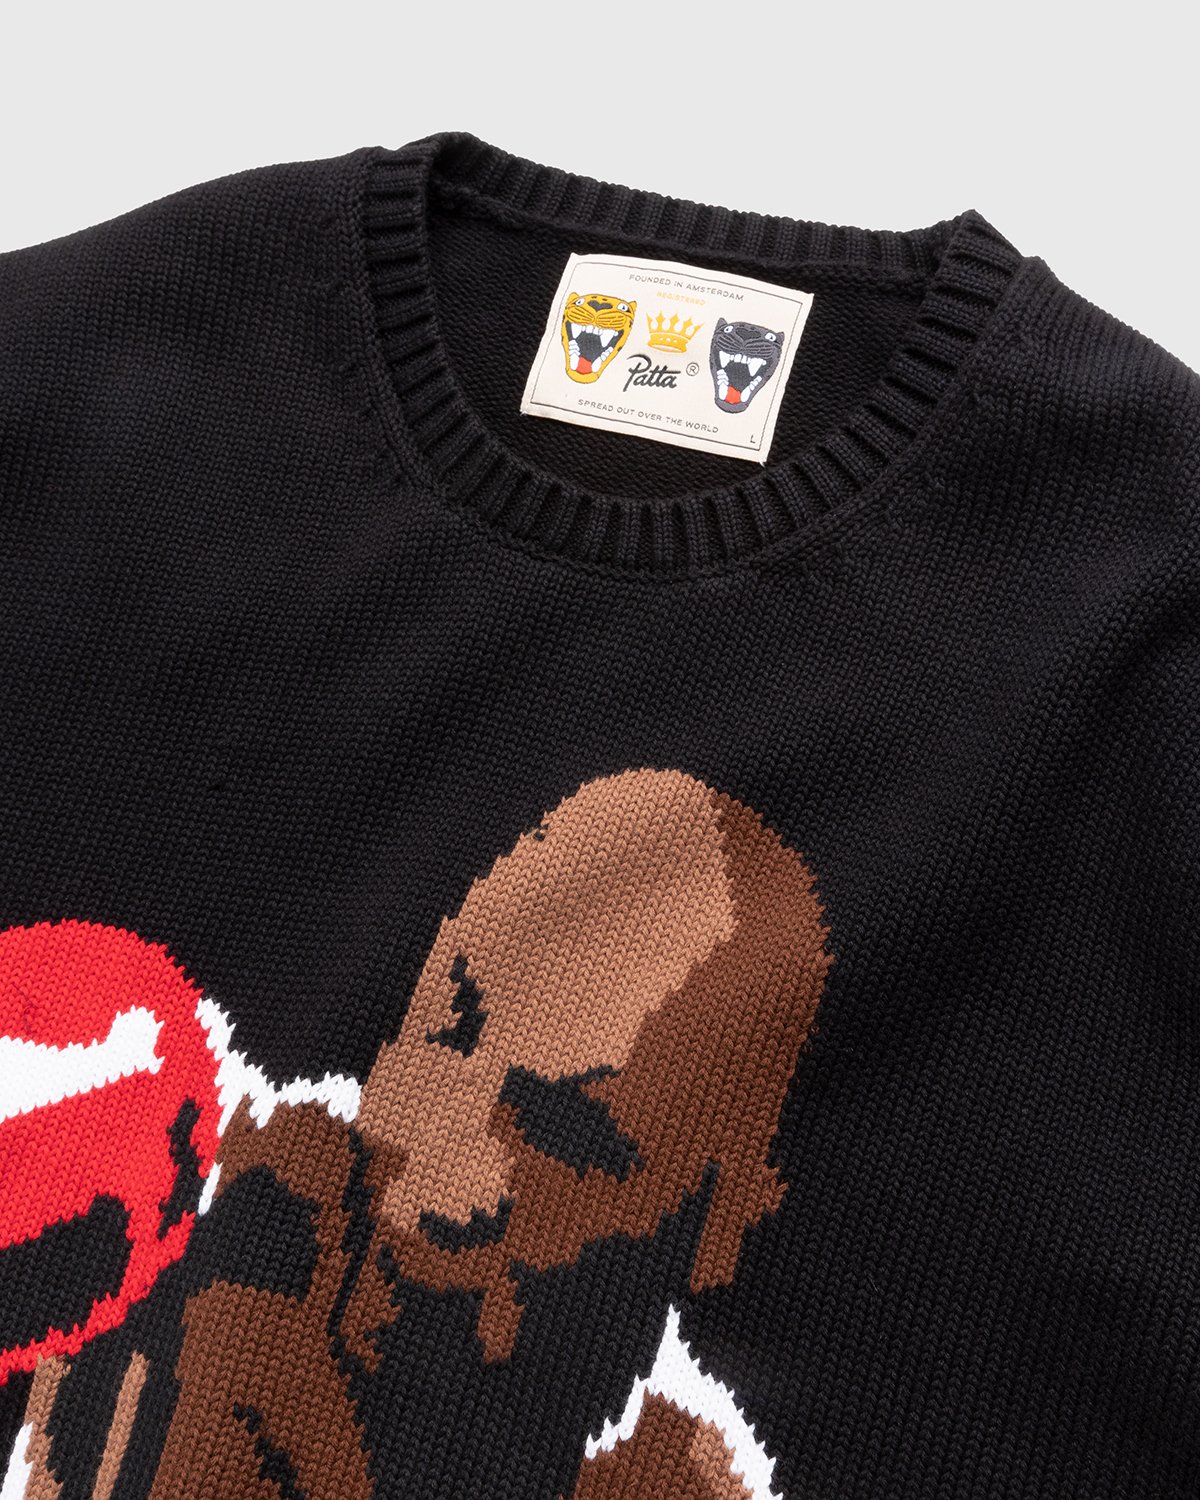 Patta - Boxer Knitted Sweater - Clothing - Black - Image 3